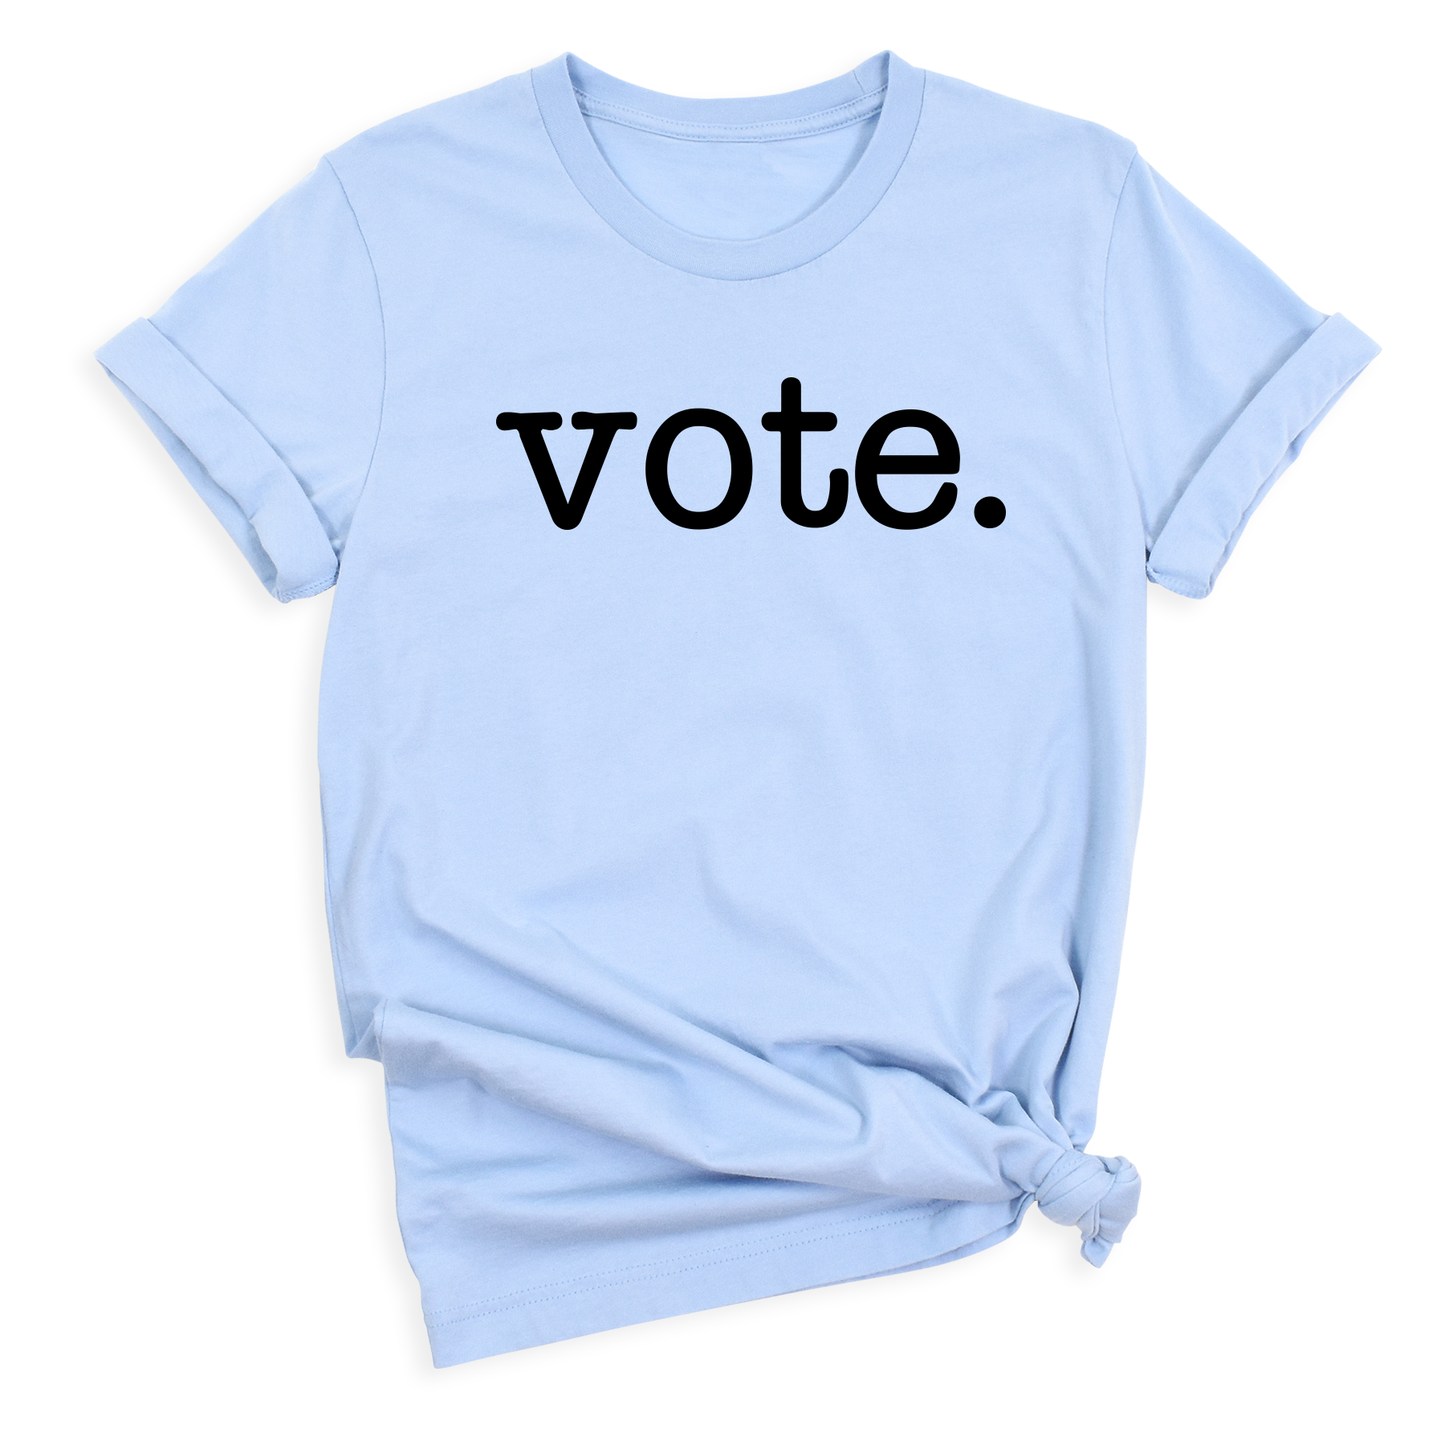 vote of shirts